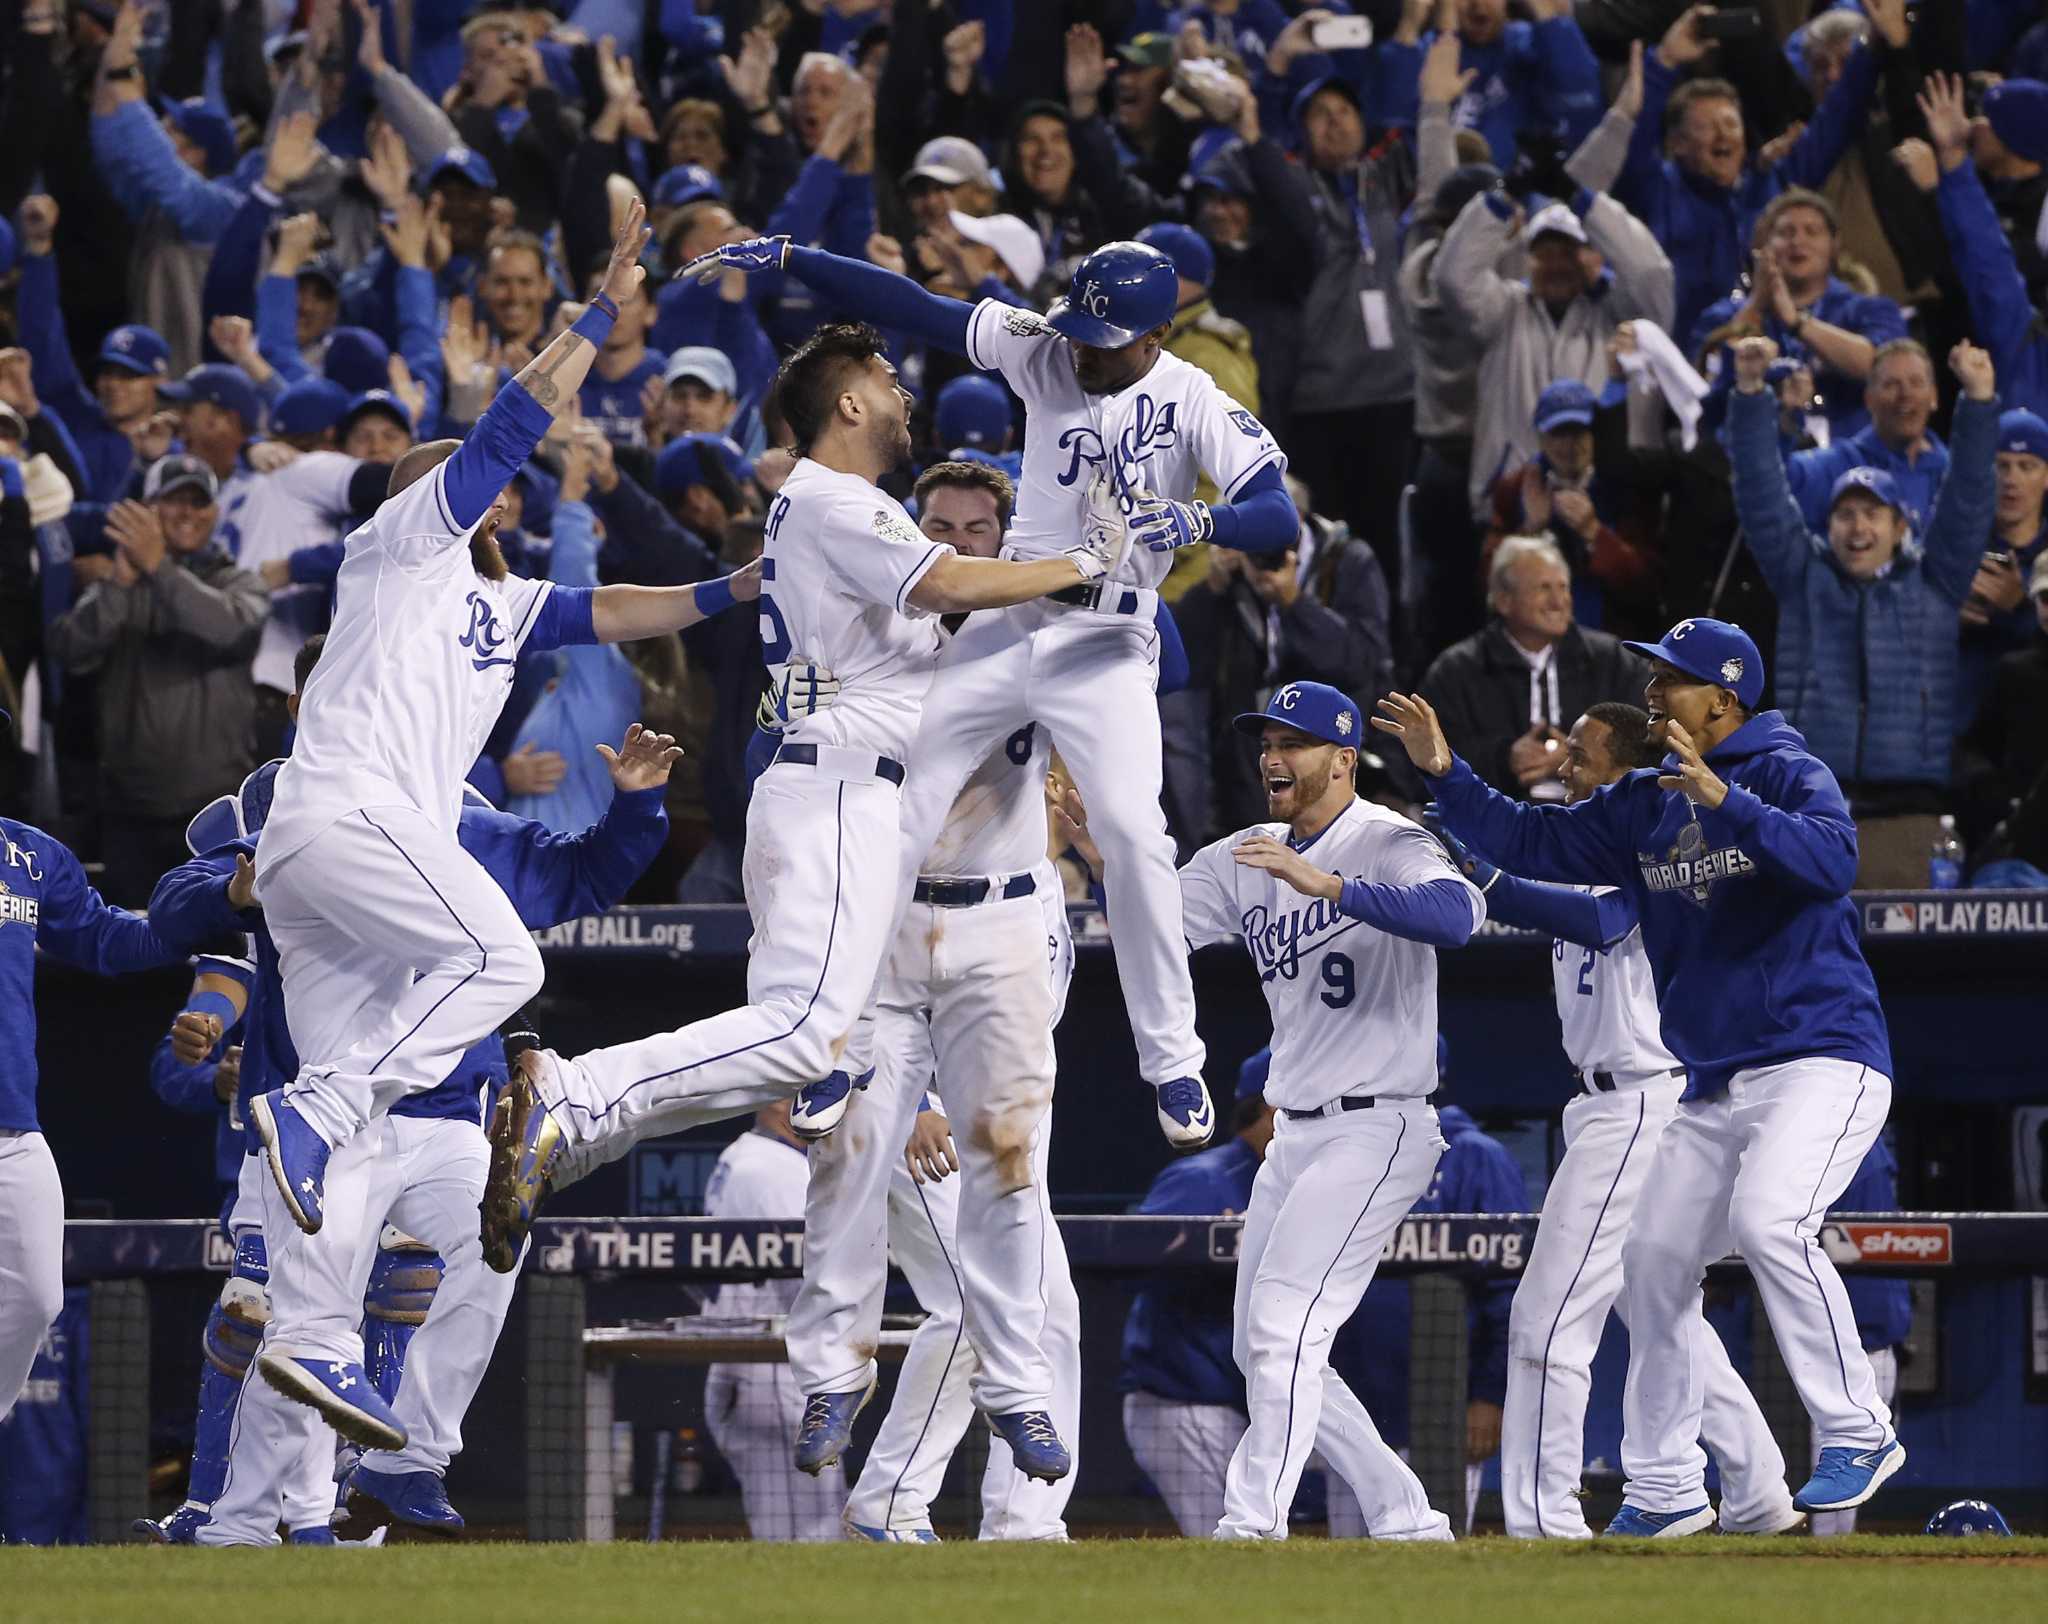 Hosmer sacrifice fly in 14th lifts Royals to World Series game 1 win